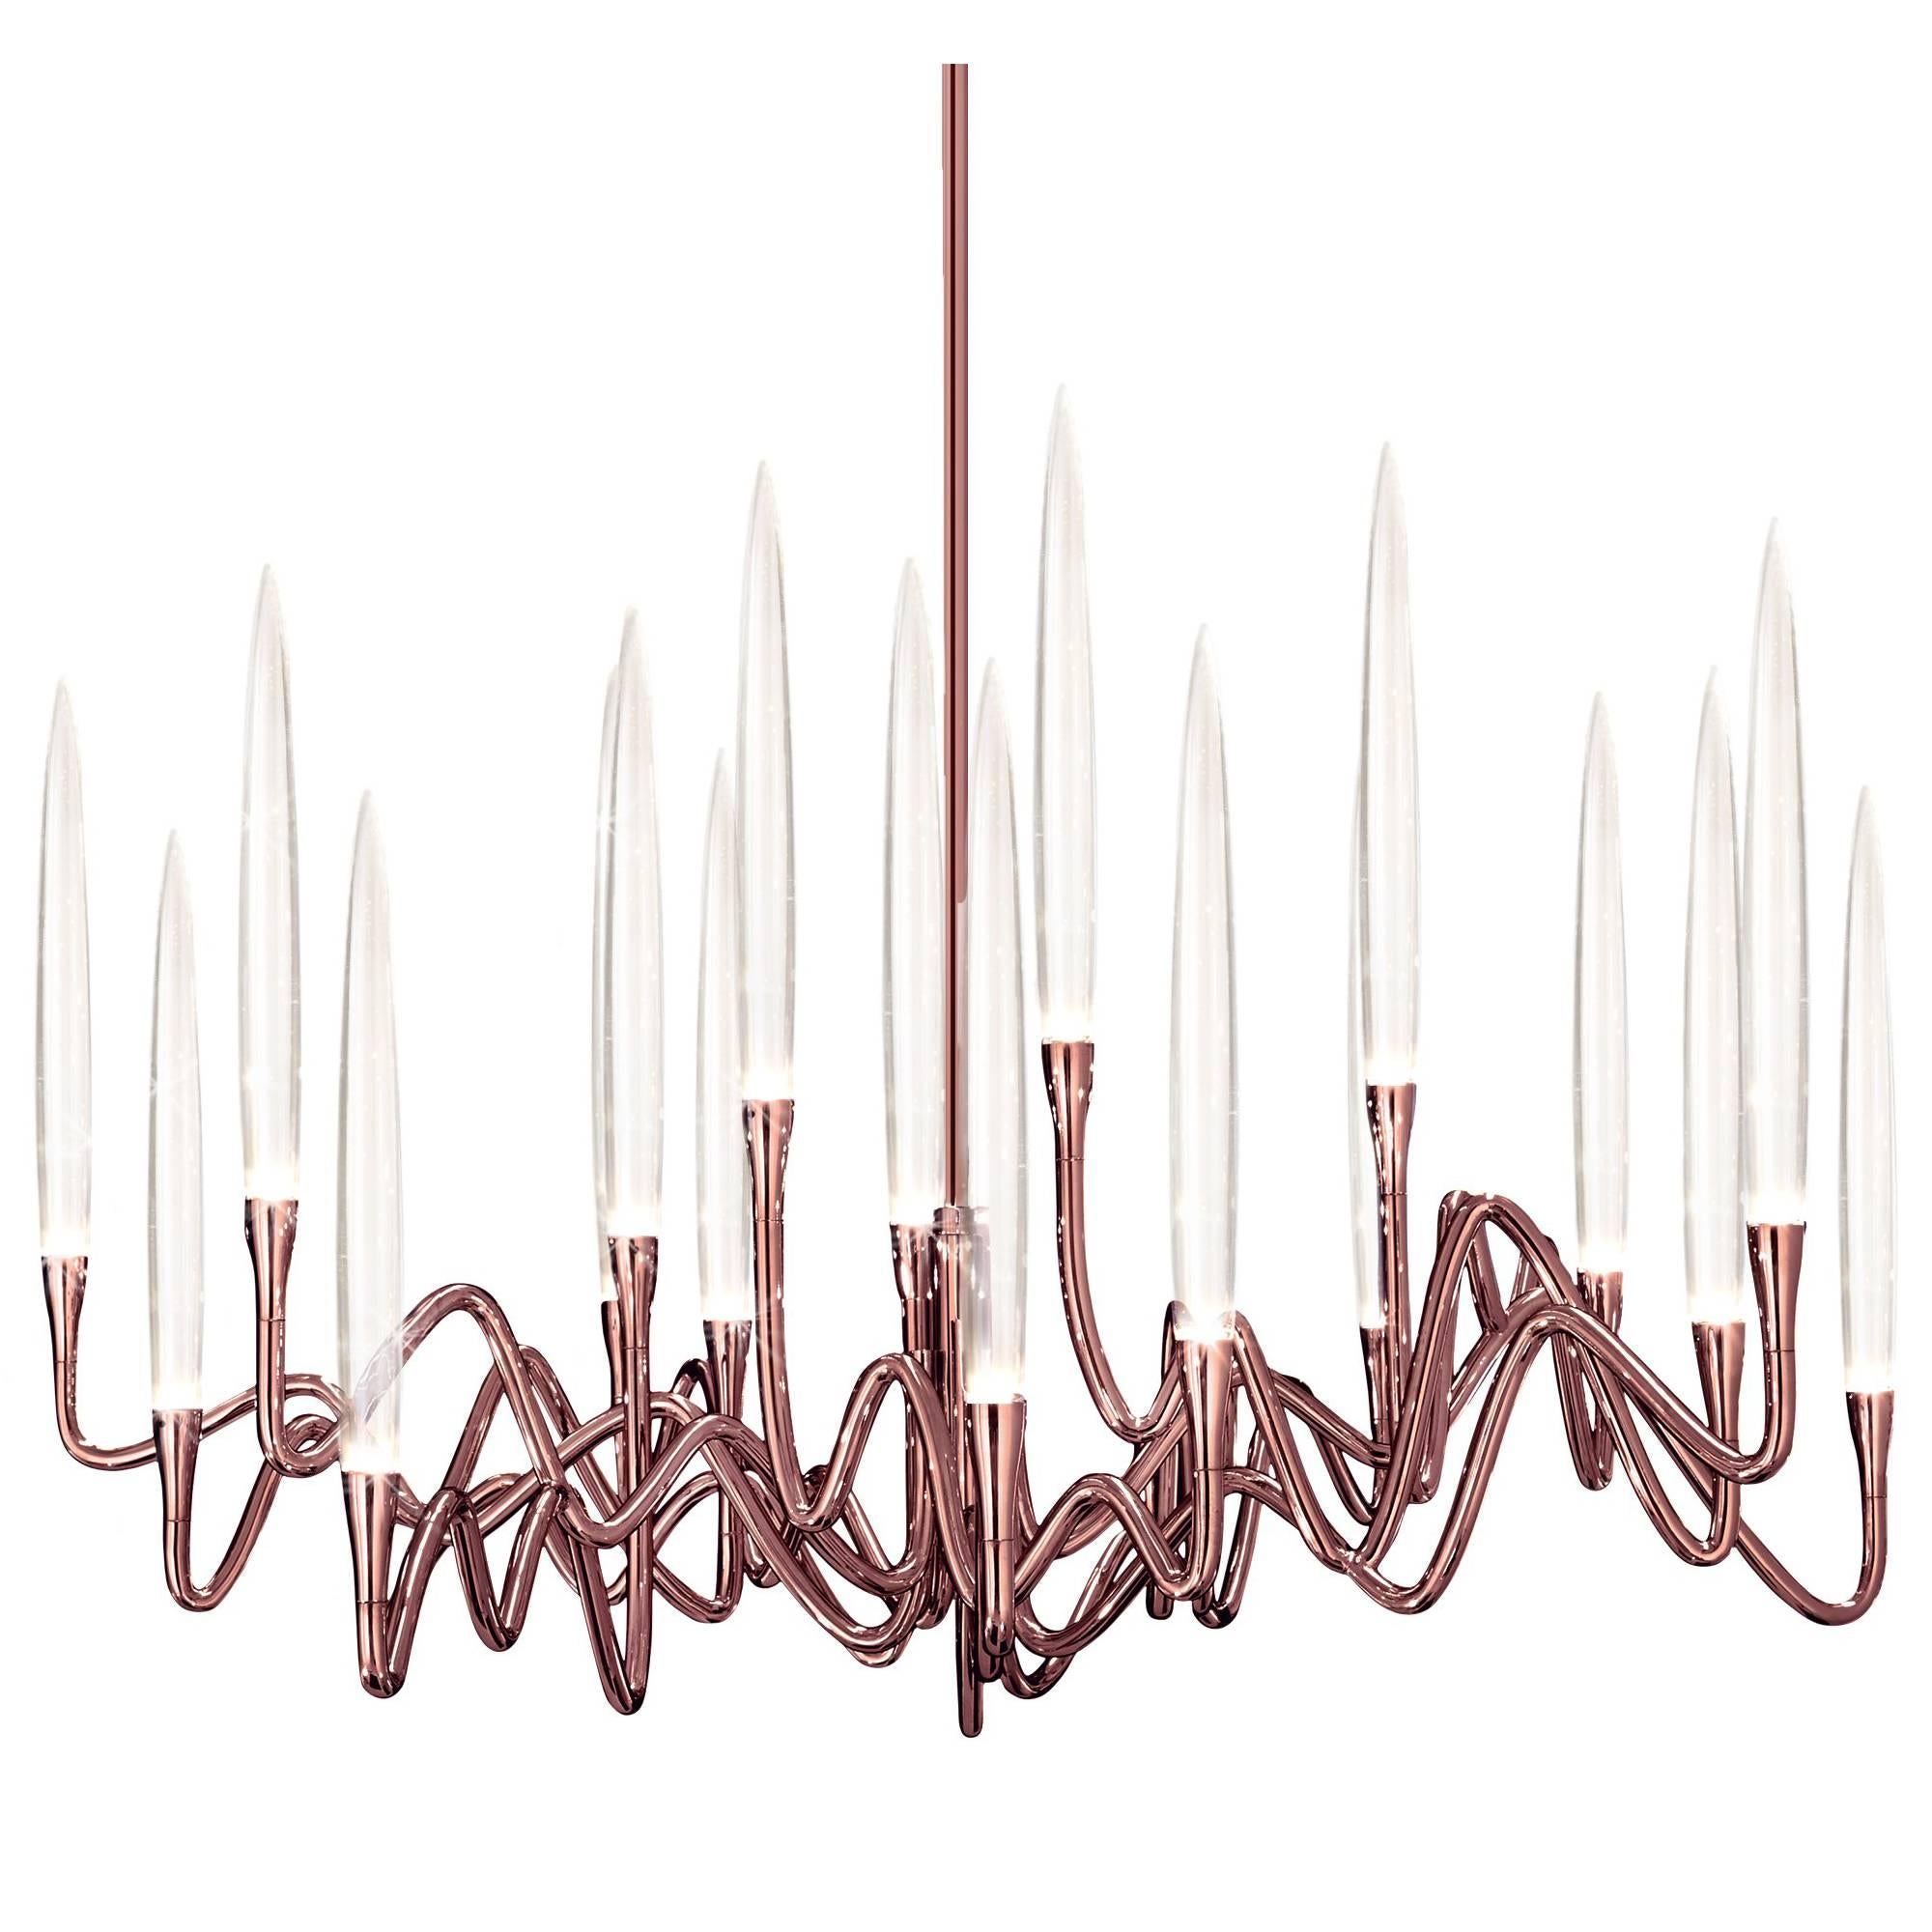 "Il Pezzo 3 Round Chandelier" solid crystal candles and LED technology